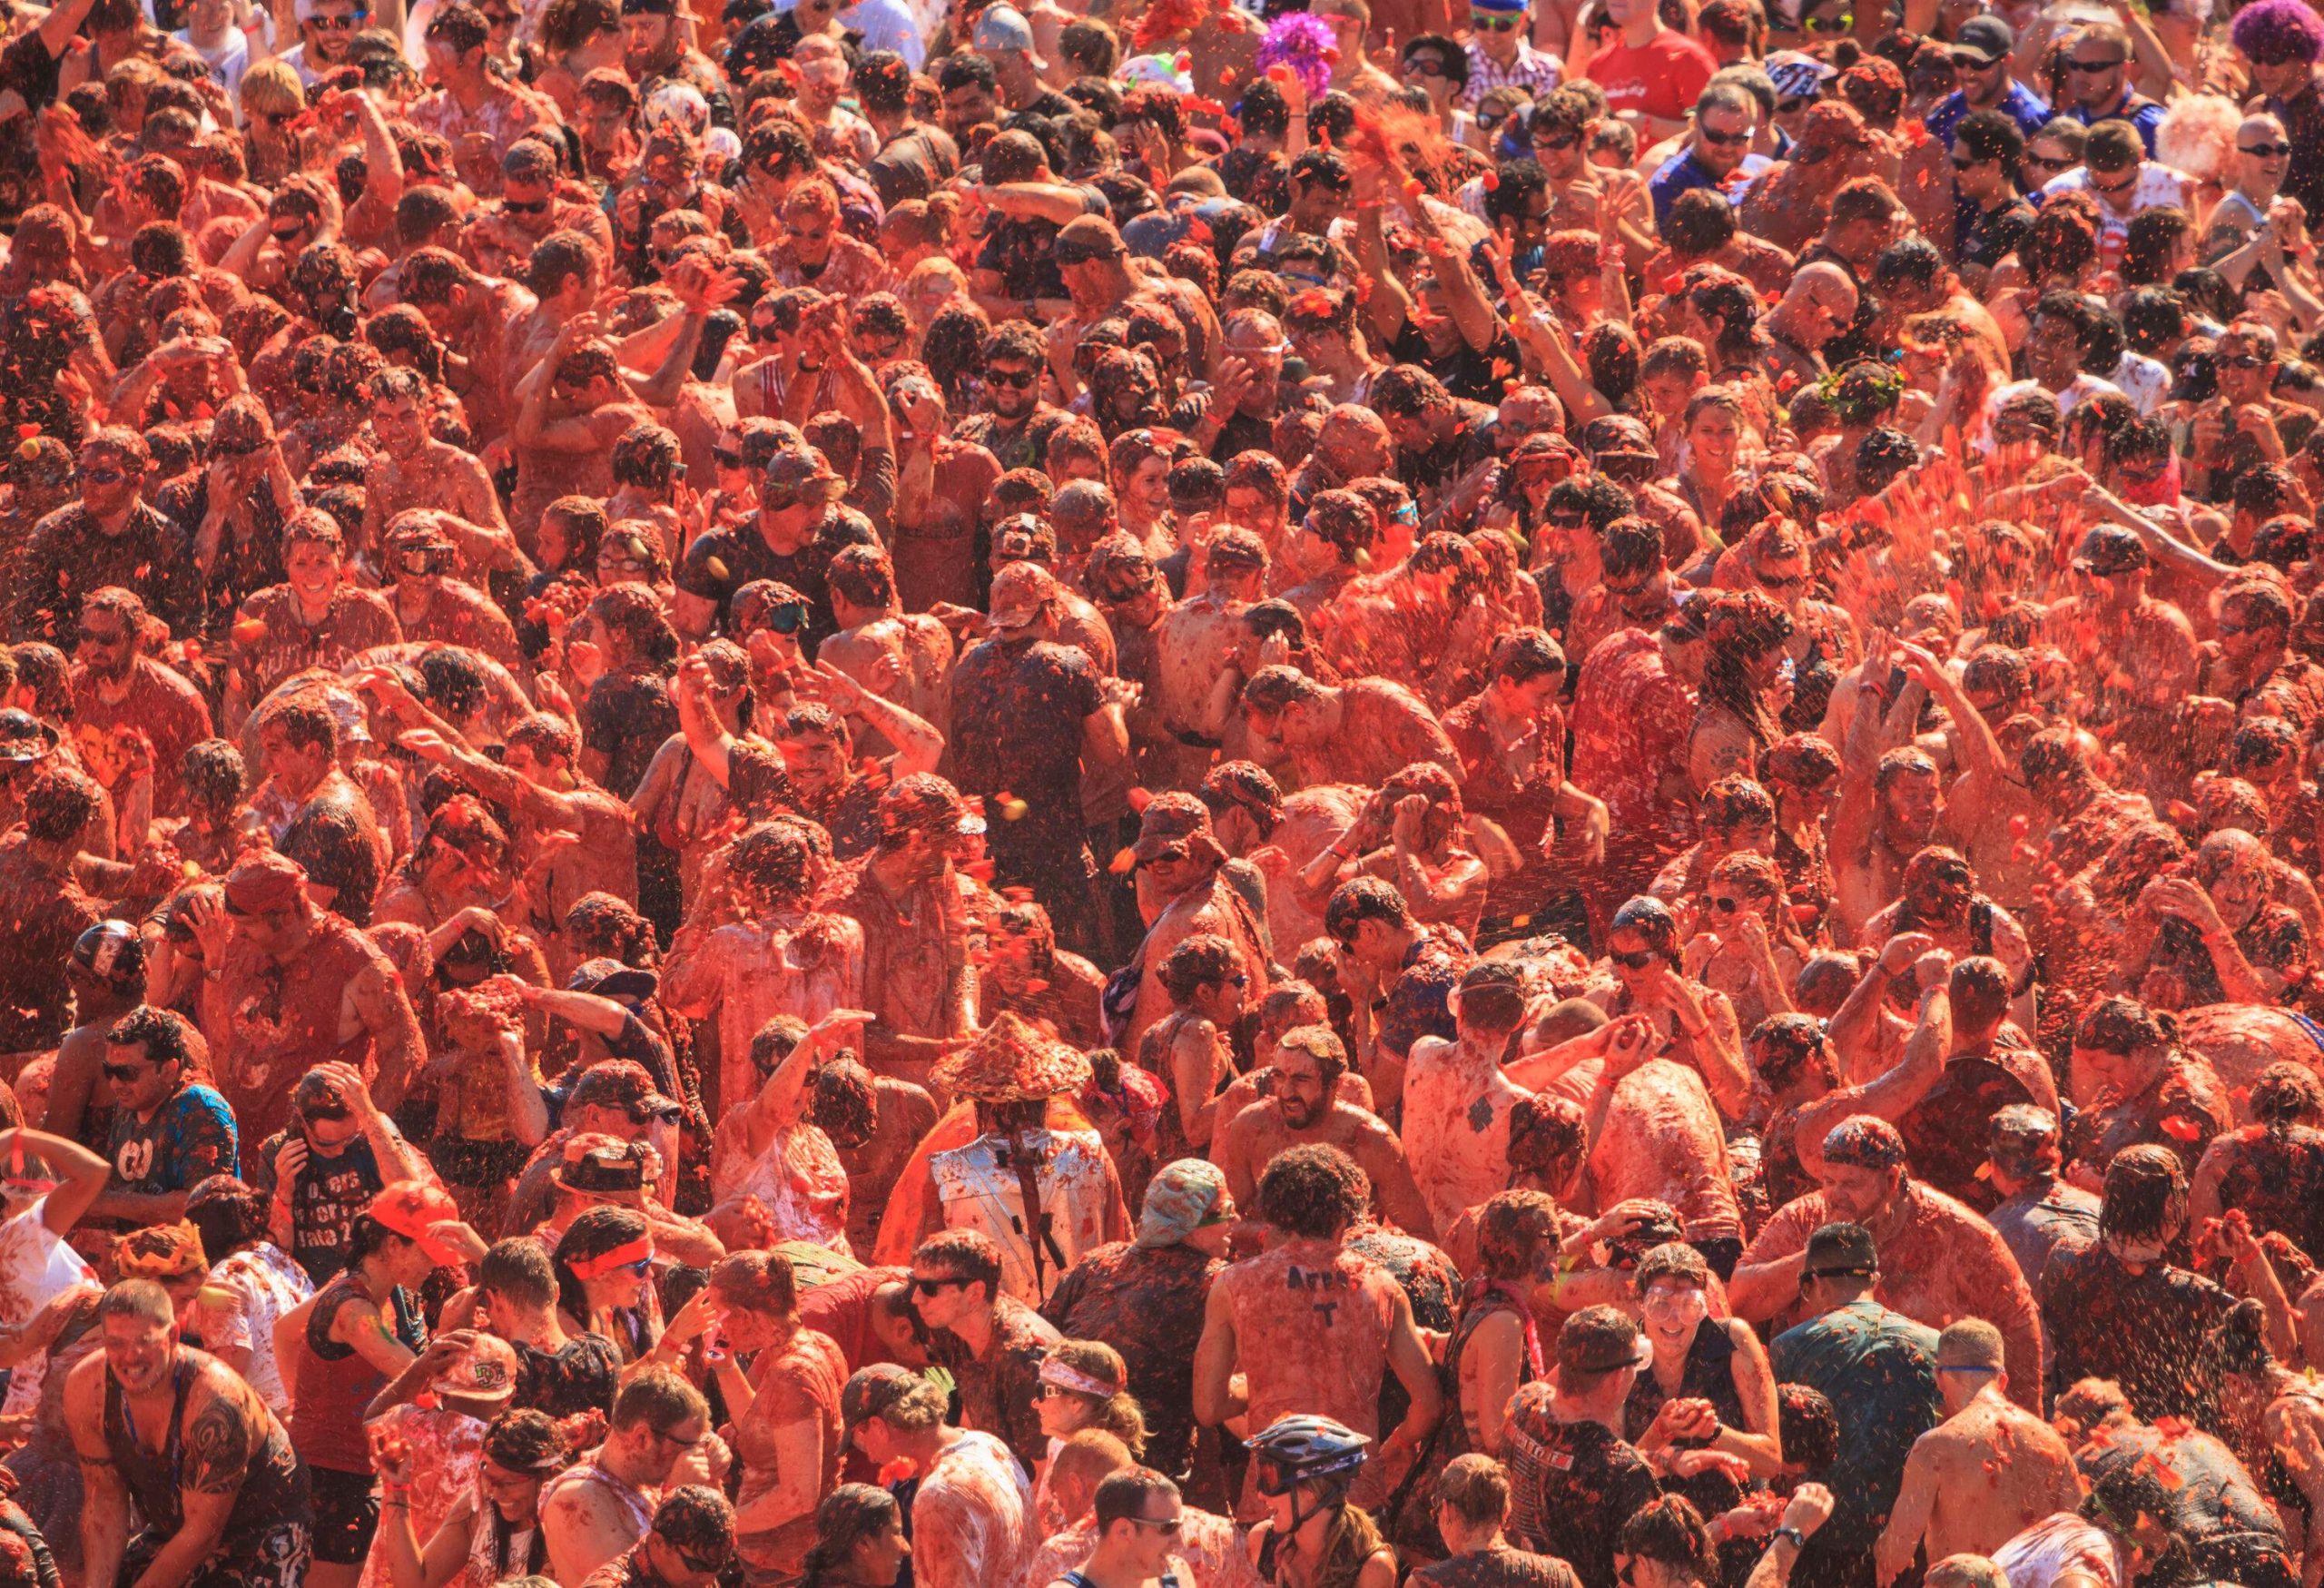 A crowd of people throwing tomatoes at each other.